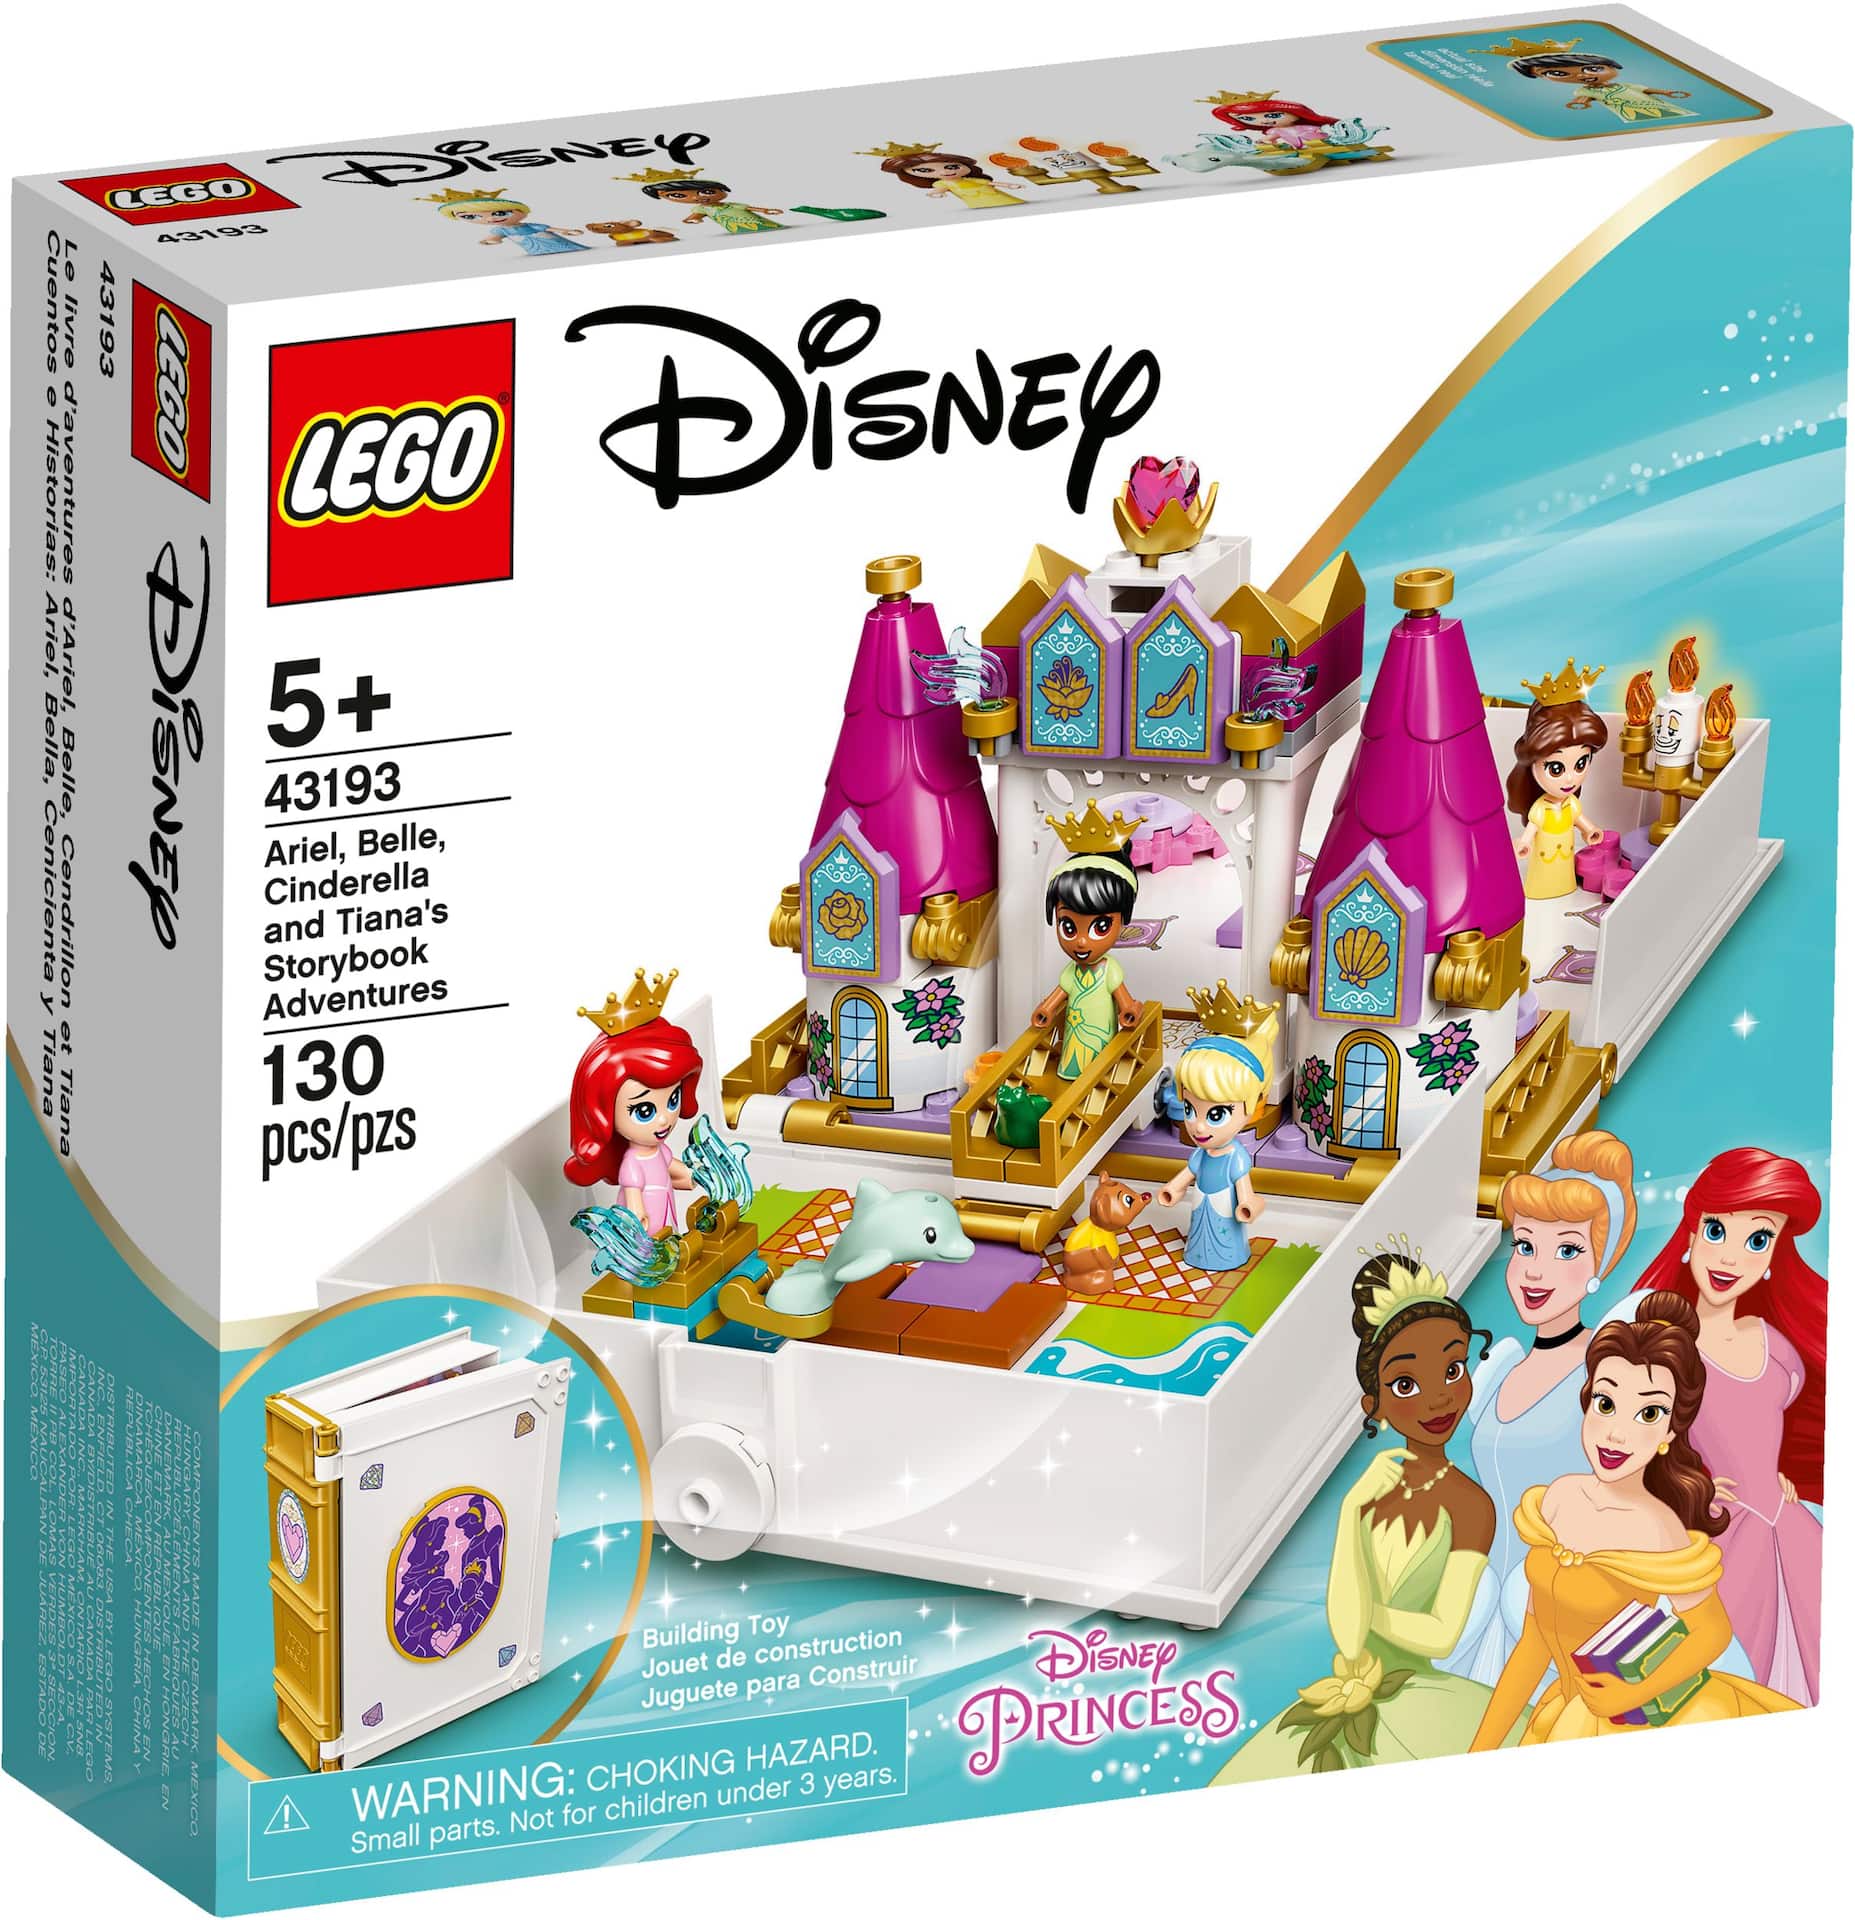 LEGO® Disney Ariel, Belle, Cinderella and Tiana's Storybook Adventures 43193, 130 pcs, Age | Canadian Tire